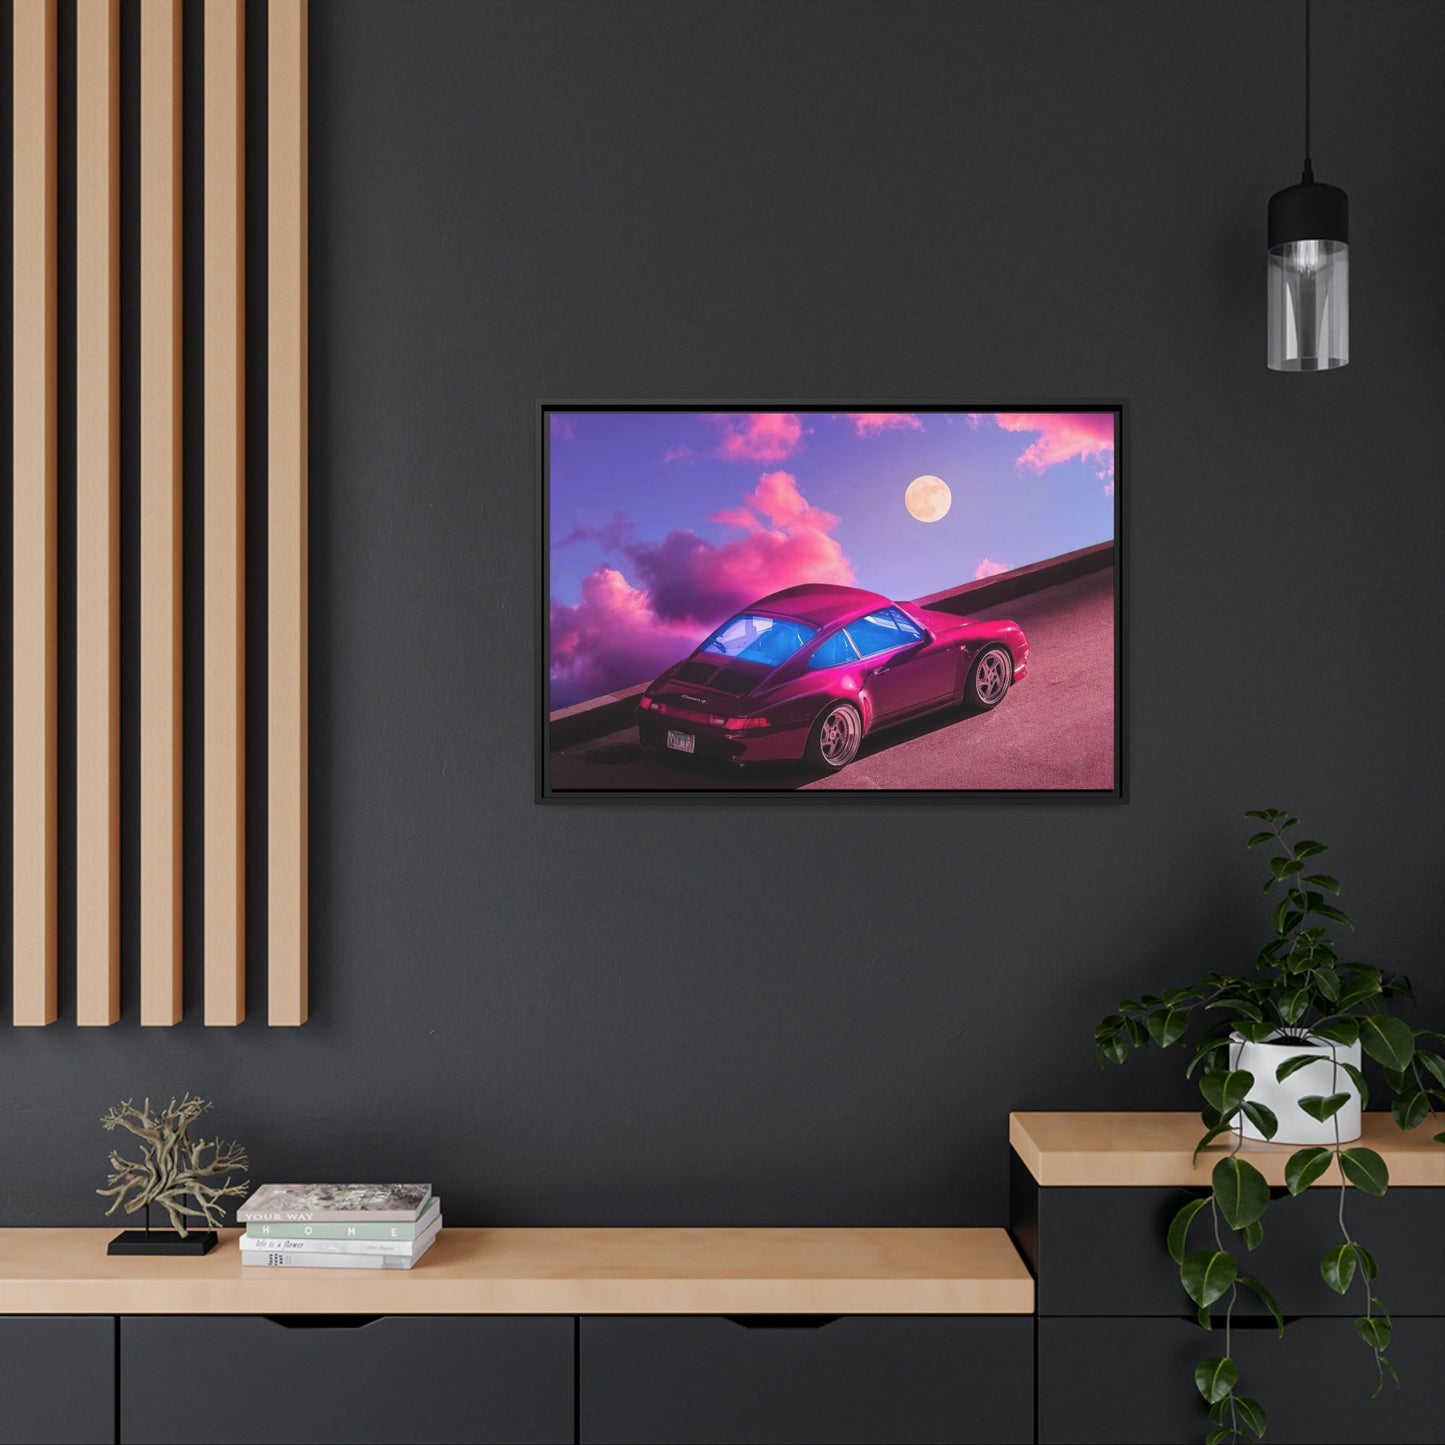 Porsche's Art of Speed: Canvas Wall Art Print That Inspires the Ultimate Driving Experience